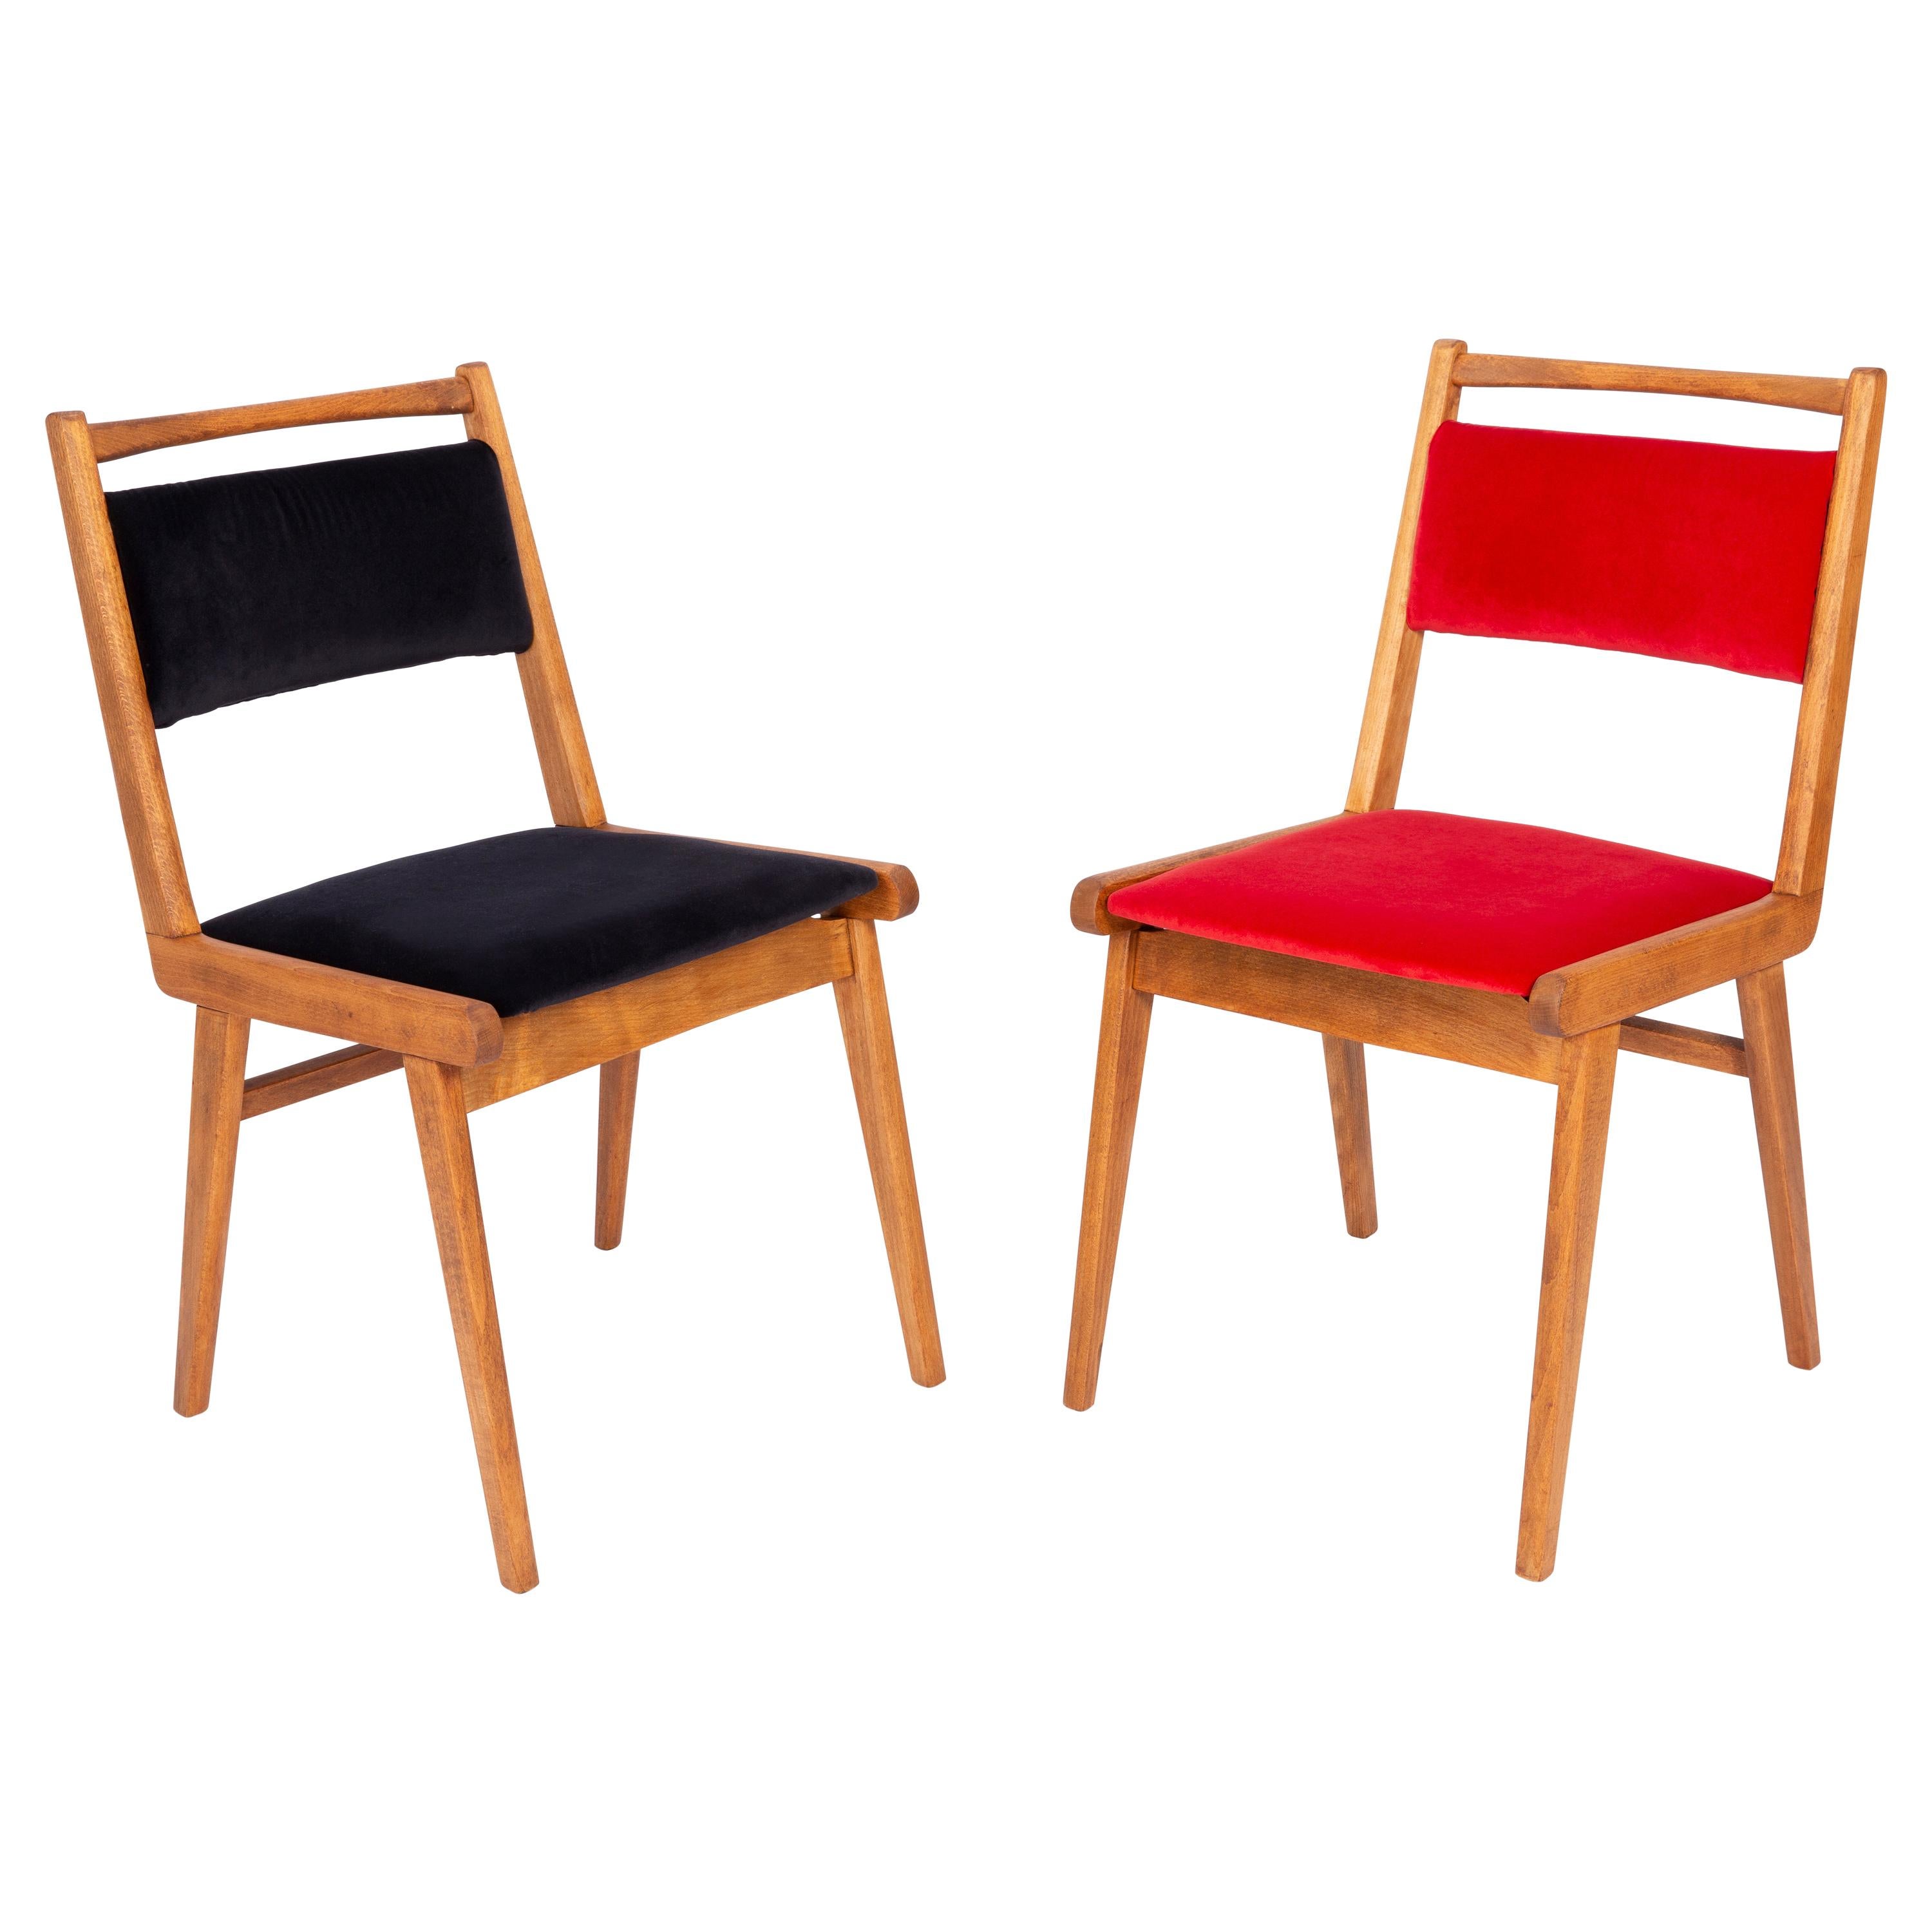 Set of Two 20th Century Black and Red Velvet Chairs, Poland, 1960s